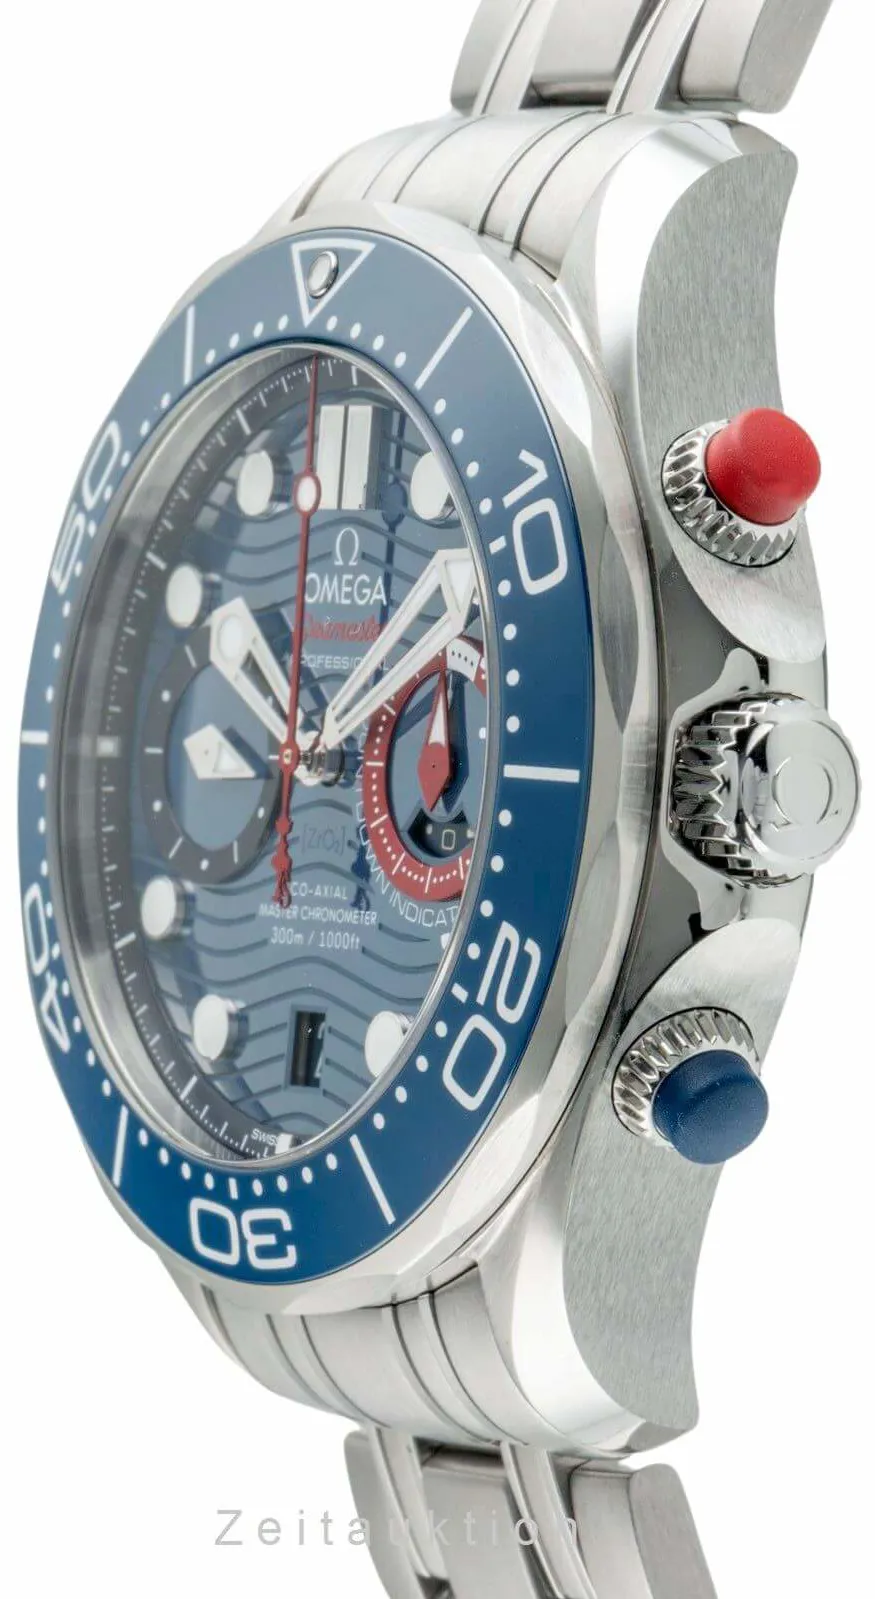 Omega Seamaster Diver 300M 210.30.44.51.03.002 44mm Stainless steel Blue 5